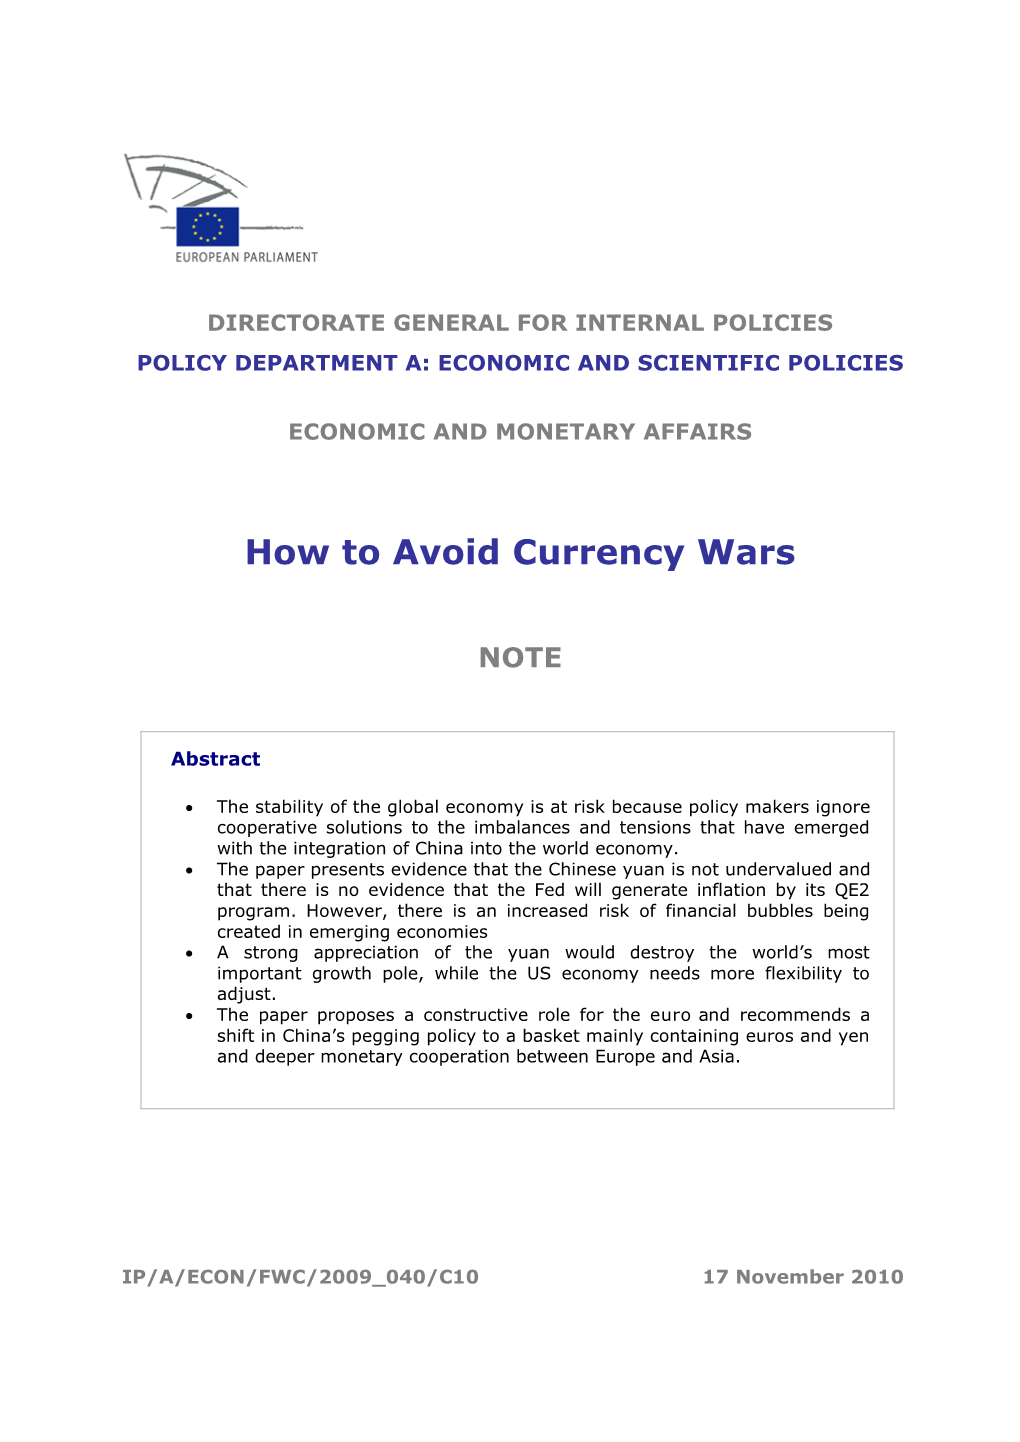 How to Avoid Currency Wars